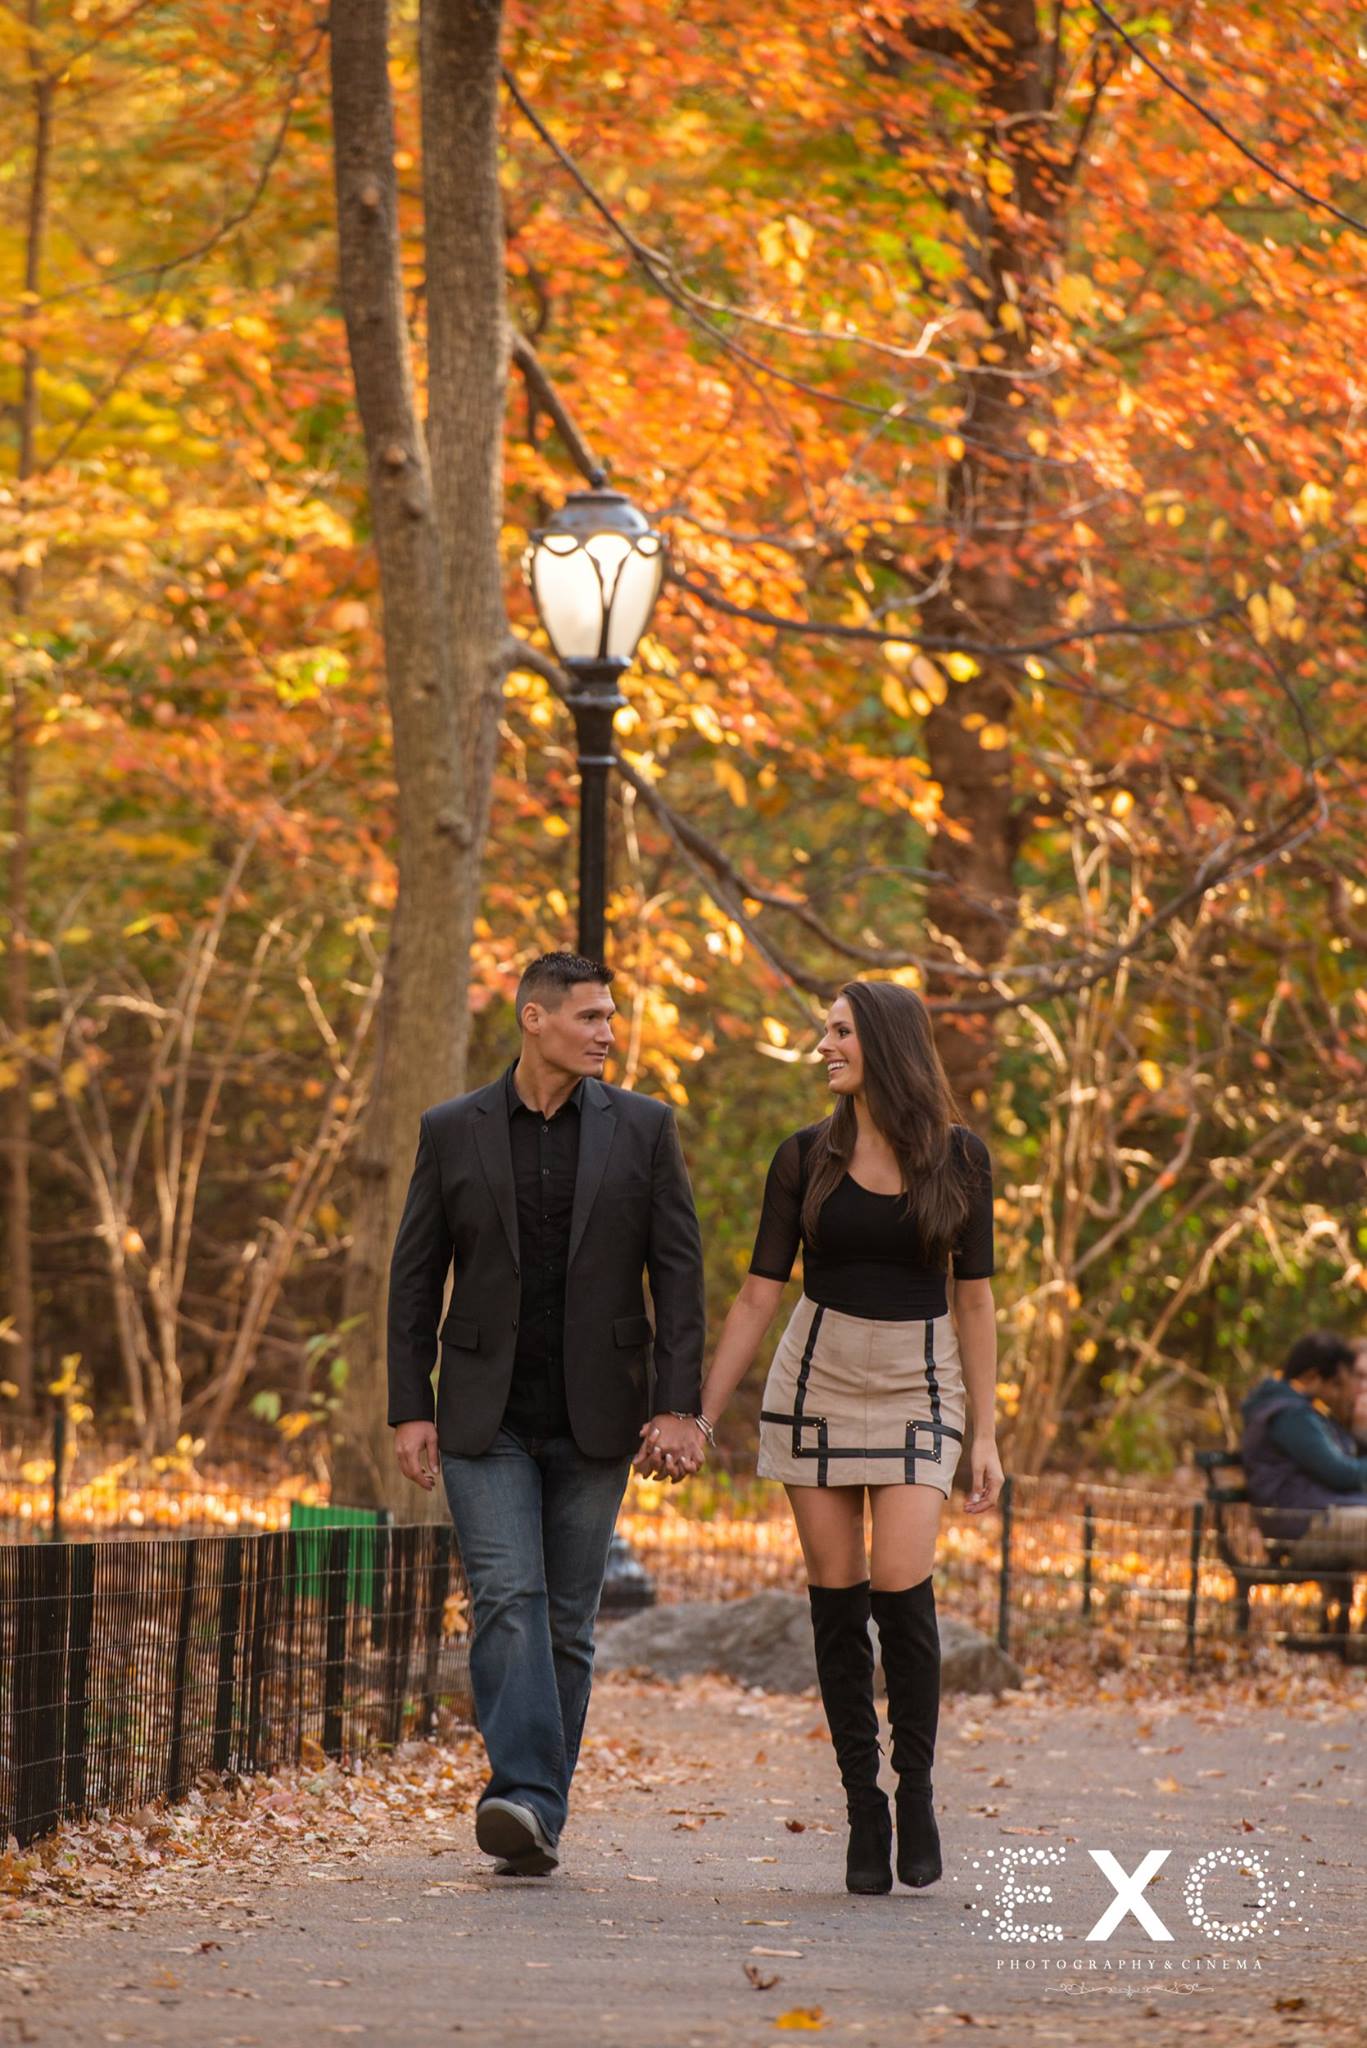 justin and daina walking in central park